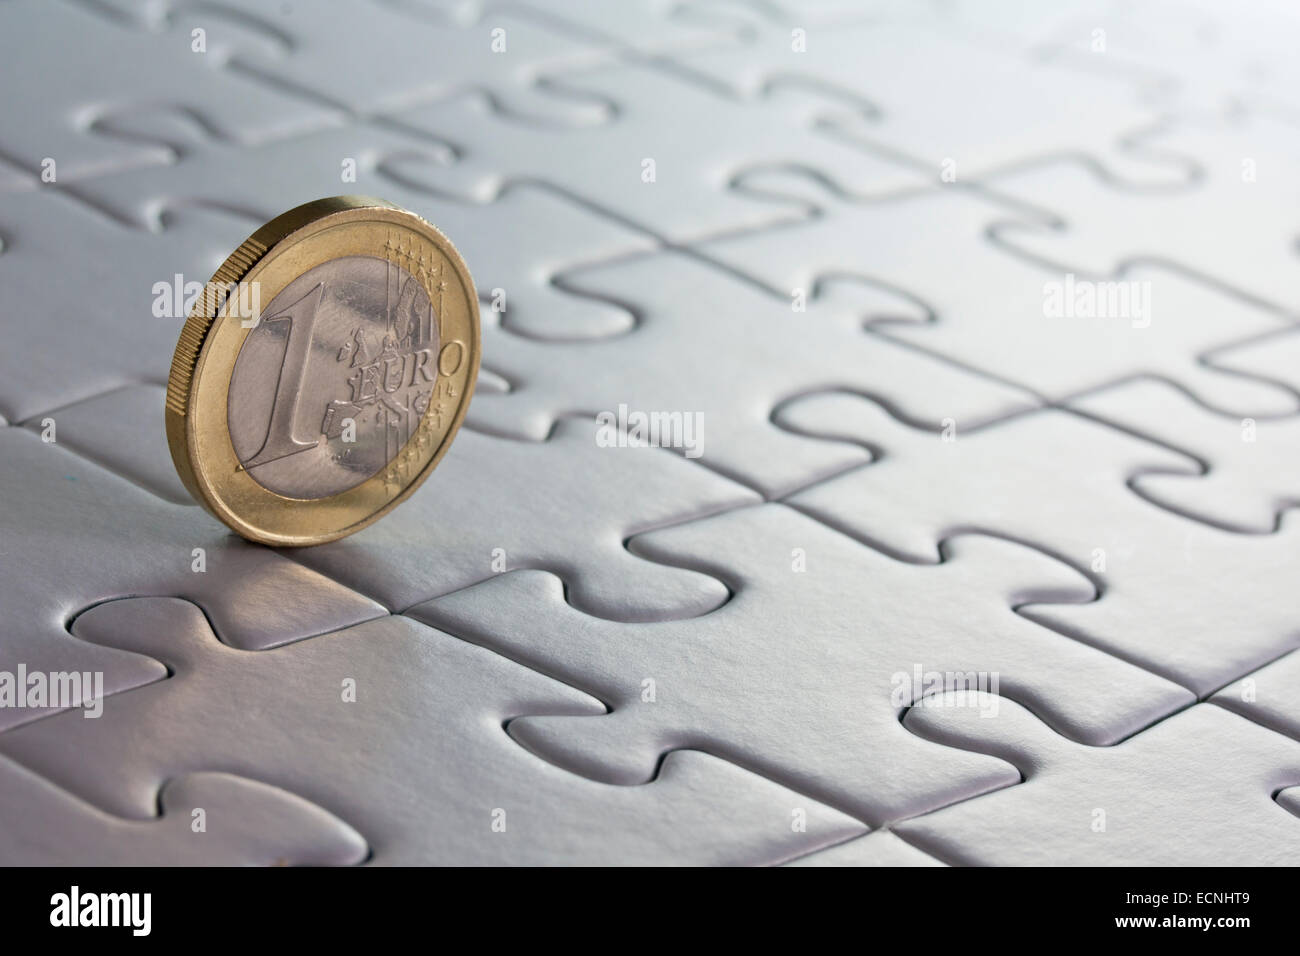 1 Euro coin on a jigsaw-puzzle Stock Photo